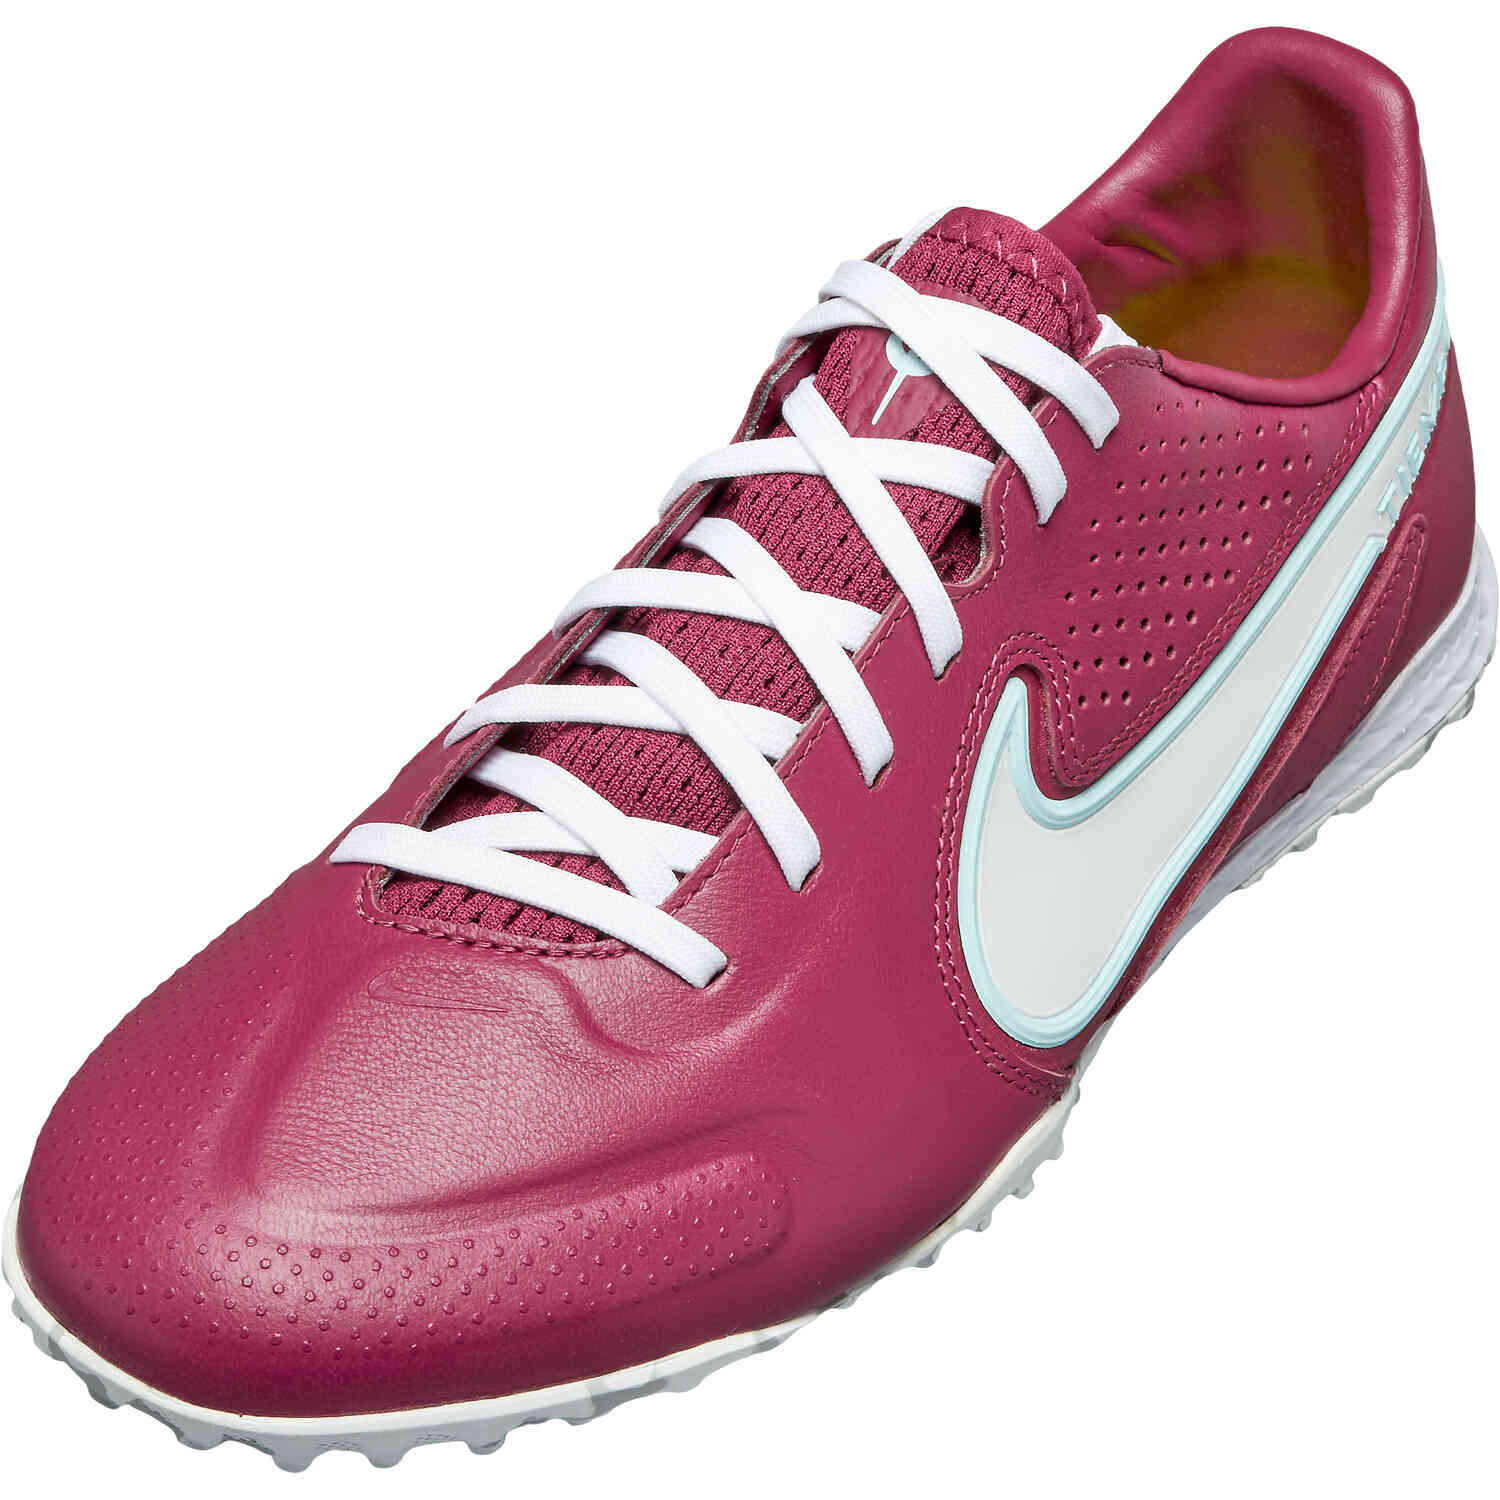 Tiempo Legend 9 Pro TF - Rosewood & White with Glacier Blue with Pink Foam - SoccerPro